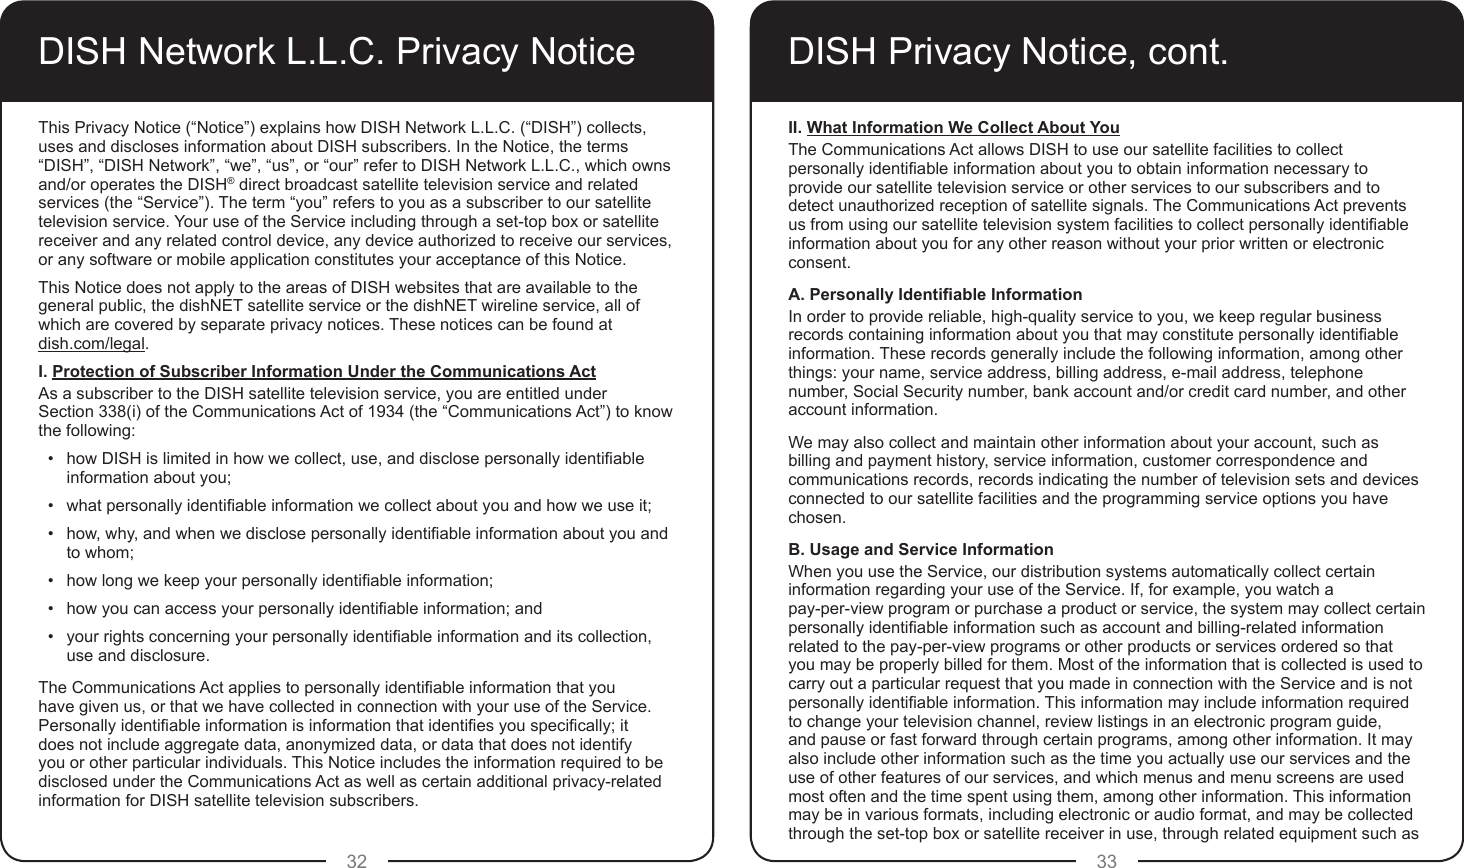 32 33DISH Network L.L.C. Privacy NoticeThis Privacy Notice (“Notice”) explains how DISH Network L.L.C. (“DISH”) collects, uses and discloses information about DISH subscribers. In the Notice, the terms “DISH”, “DISH Network”, “we”, “us”, or “our” refer to DISH Network L.L.C., which owns and/or operates the DISH® direct broadcast satellite television service and related services (the “Service”). The term “you” refers to you as a subscriber to our satellite television service. Your use of the Service including through a set-top box or satellite receiver and any related control device, any device authorized to receive our services, or any software or mobile application constitutes your acceptance of this Notice.This Notice does not apply to the areas of DISH websites that are available to the general public, the dishNET satellite service or the dishNET wireline service, all of which are covered by separate privacy notices. These notices can be found at  dish.com/legal.I. Protection of Subscriber Information Under the Communications ActAs a subscriber to the DISH satellite television service, you are entitled under  Section 338(i) of the Communications Act of 1934 (the “Communications Act”) to know the following:•  how DISH is limited in how we collect, use, and disclose personally identiable information about you;•  what personally identiable information we collect about you and how we use it;•  how, why, and when we disclose personally identiable information about you and to whom;•  how long we keep your personally identiable information;•  how you can access your personally identiable information; and•  your rights concerning your personally identiable information and its collection, use and disclosure.The Communications Act applies to personally identiable information that you have given us, or that we have collected in connection with your use of the Service. Personally identiable information is information that identies you specically; it does not include aggregate data, anonymized data, or data that does not identify you or other particular individuals. This Notice includes the information required to be disclosed under the Communications Act as well as certain additional privacy-related information for DISH satellite television subscribers.DISH Privacy Notice, cont.II. What Information We Collect About YouThe Communications Act allows DISH to use our satellite facilities to collect personally identiable information about you to obtain information necessary to provide our satellite television service or other services to our subscribers and to detect unauthorized reception of satellite signals. The Communications Act prevents us from using our satellite television system facilities to collect personally identiable information about you for any other reason without your prior written or electronic consent.A. Personally Identiable InformationIn order to provide reliable, high-quality service to you, we keep regular business records containing information about you that may constitute personally identiable information. These records generally include the following information, among other things: your name, service address, billing address, e-mail address, telephone number, Social Security number, bank account and/or credit card number, and other account information.We may also collect and maintain other information about your account, such as billing and payment history, service information, customer correspondence and communications records, records indicating the number of television sets and devices connected to our satellite facilities and the programming service options you have chosen.B. Usage and Service InformationWhen you use the Service, our distribution systems automatically collect certain information regarding your use of the Service. If, for example, you watch a  pay-per-view program or purchase a product or service, the system may collect certain personally identiable information such as account and billing-related information related to the pay-per-view programs or other products or services ordered so that you may be properly billed for them. Most of the information that is collected is used to carry out a particular request that you made in connection with the Service and is not personally identiable information. This information may include information required to change your television channel, review listings in an electronic program guide, and pause or fast forward through certain programs, among other information. It may also include other information such as the time you actually use our services and the use of other features of our services, and which menus and menu screens are used most often and the time spent using them, among other information. This information may be in various formats, including electronic or audio format, and may be collected through the set-top box or satellite receiver in use, through related equipment such as 